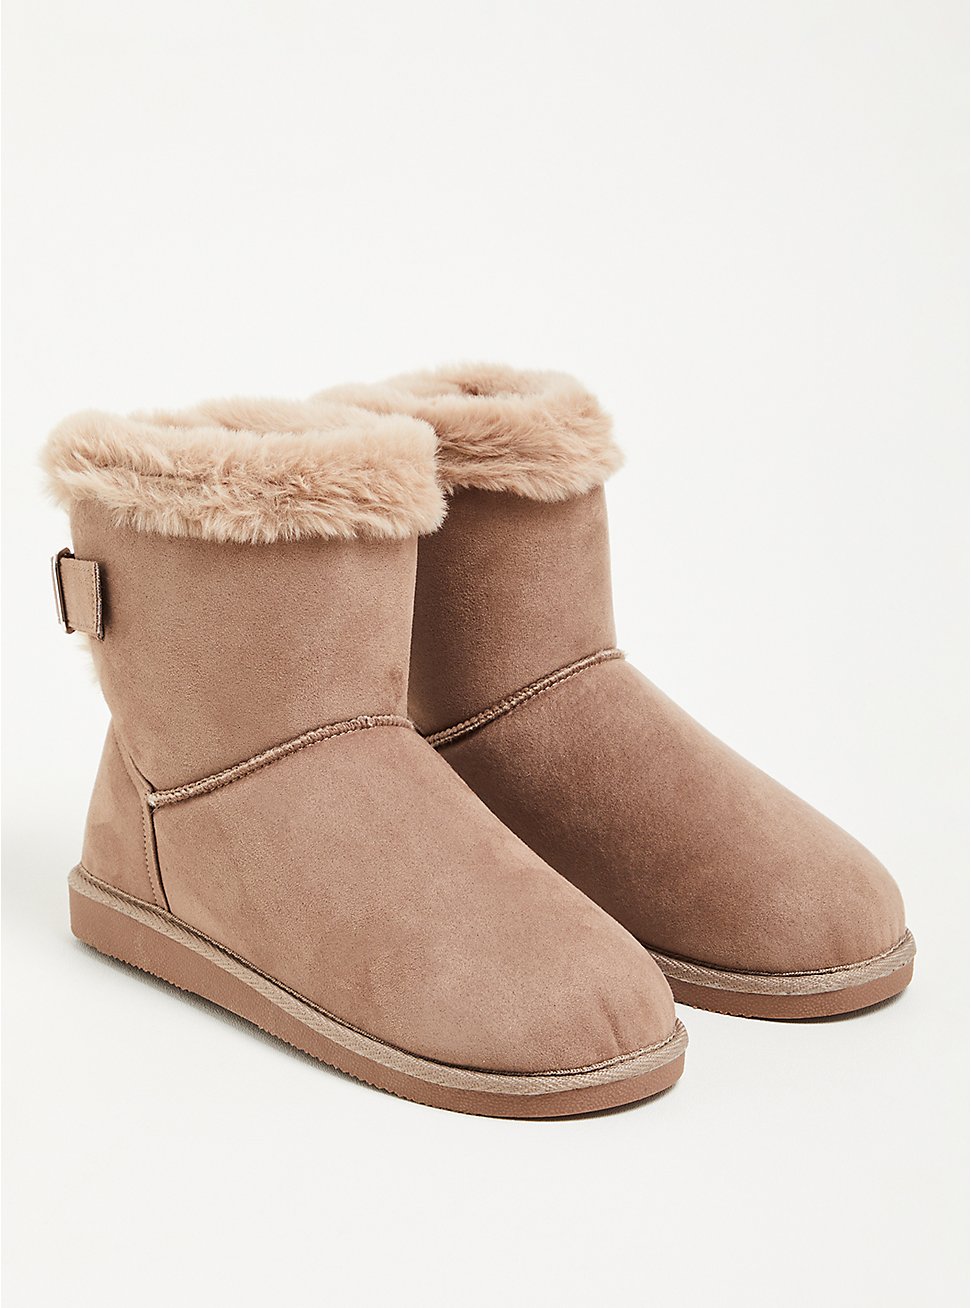 Fur-Lined Bootie - Faux Suede Taupe (WW), TAUPE, hi-res